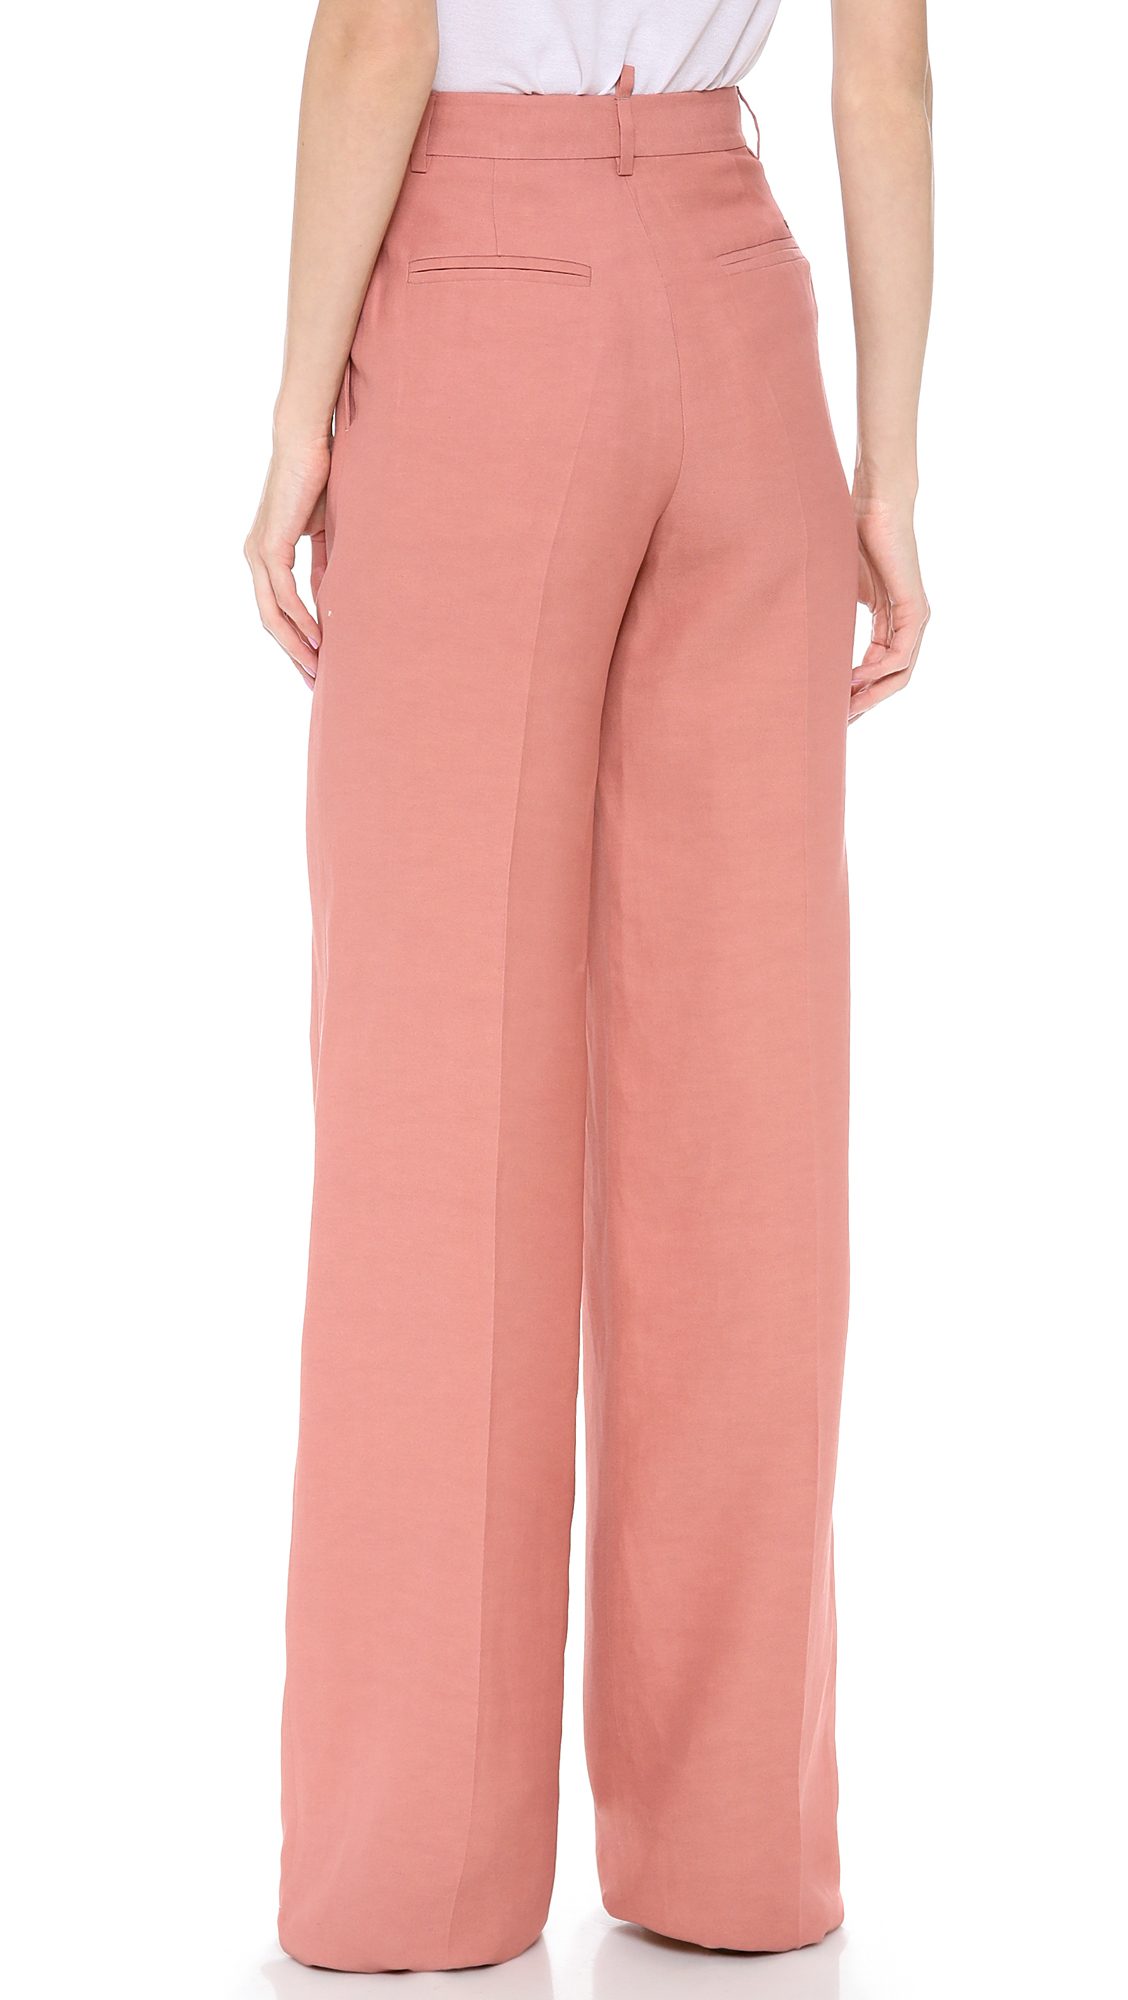 DSquared² High Waist Wide Pants in Antique Pink (Pink) - Lyst